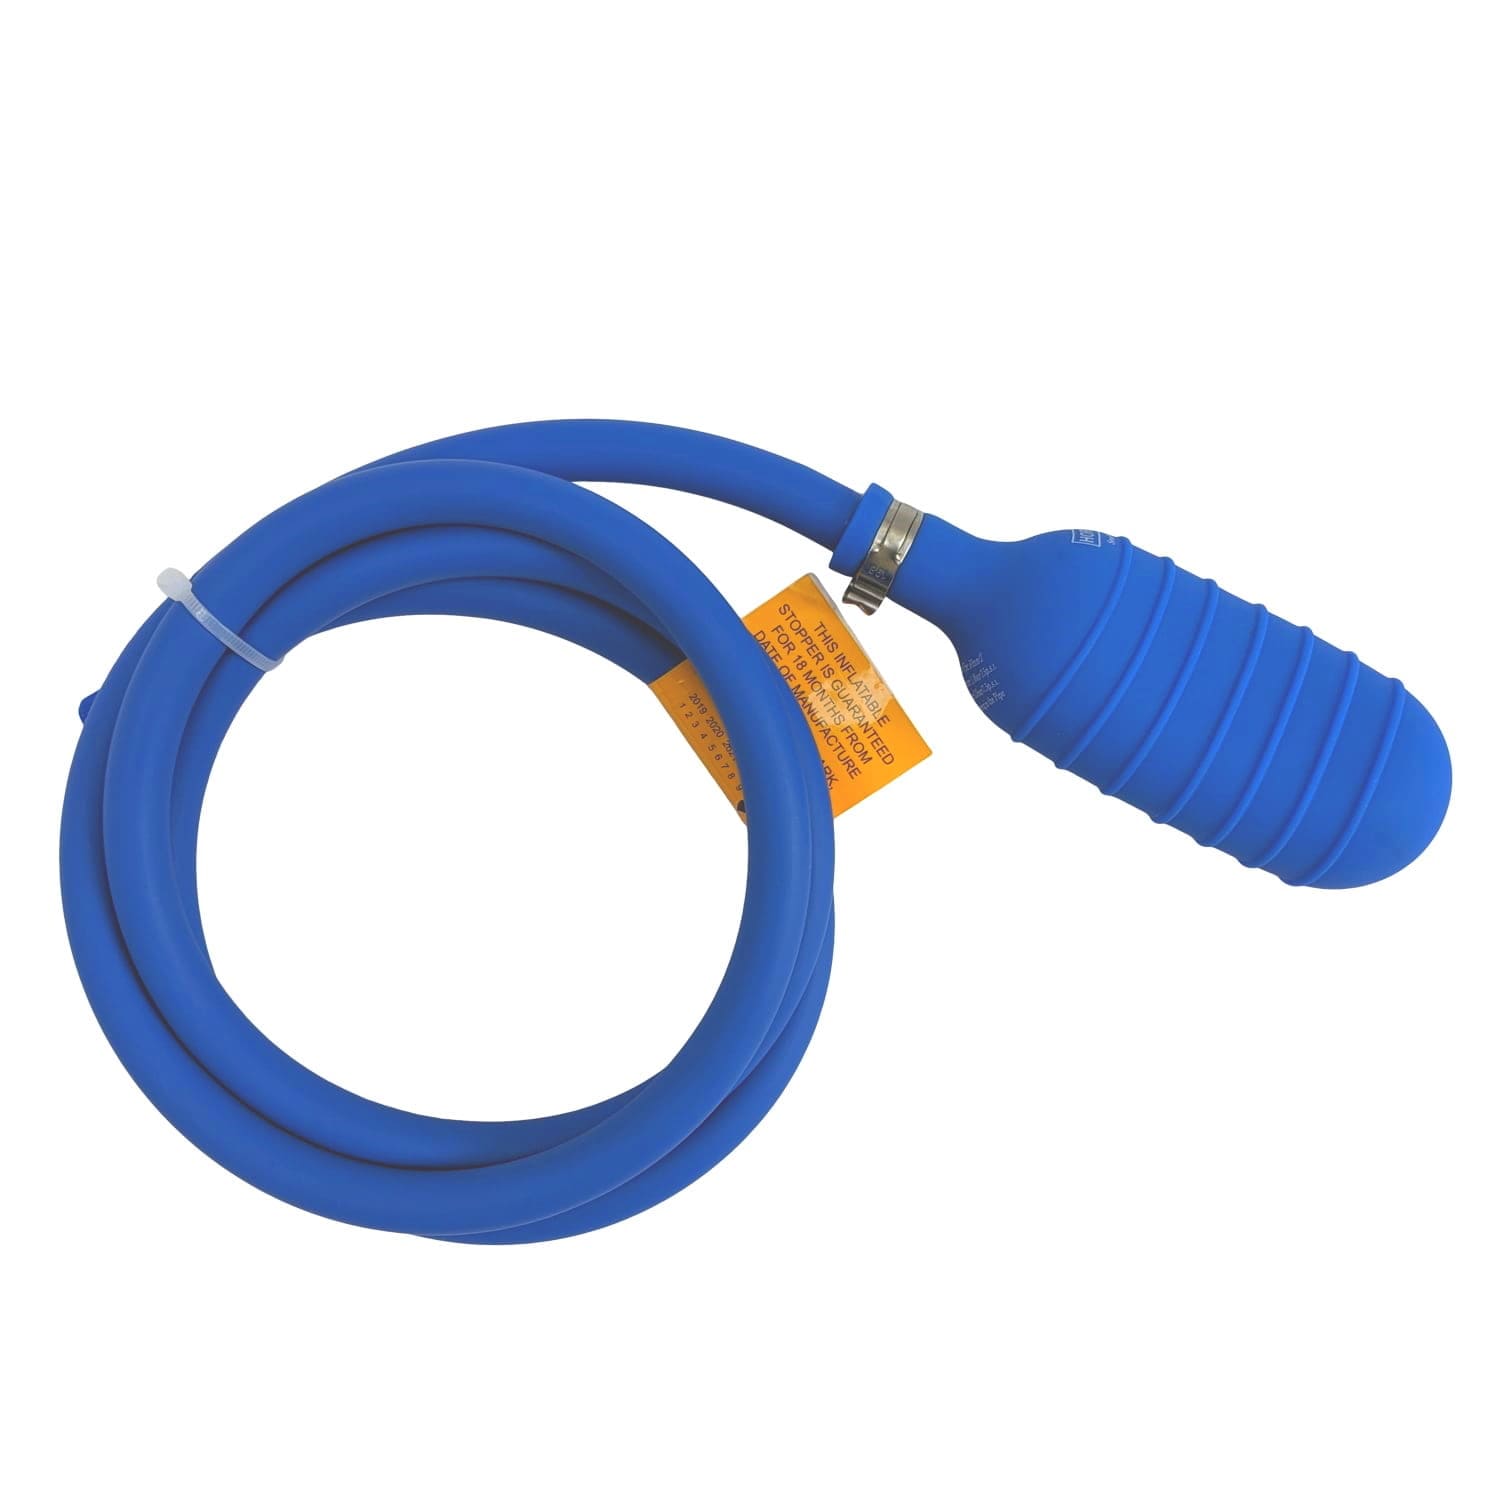 Inflatable PVC Pipe Plugs, fitted with 1.5m Inflation Hose & Schrader Valve